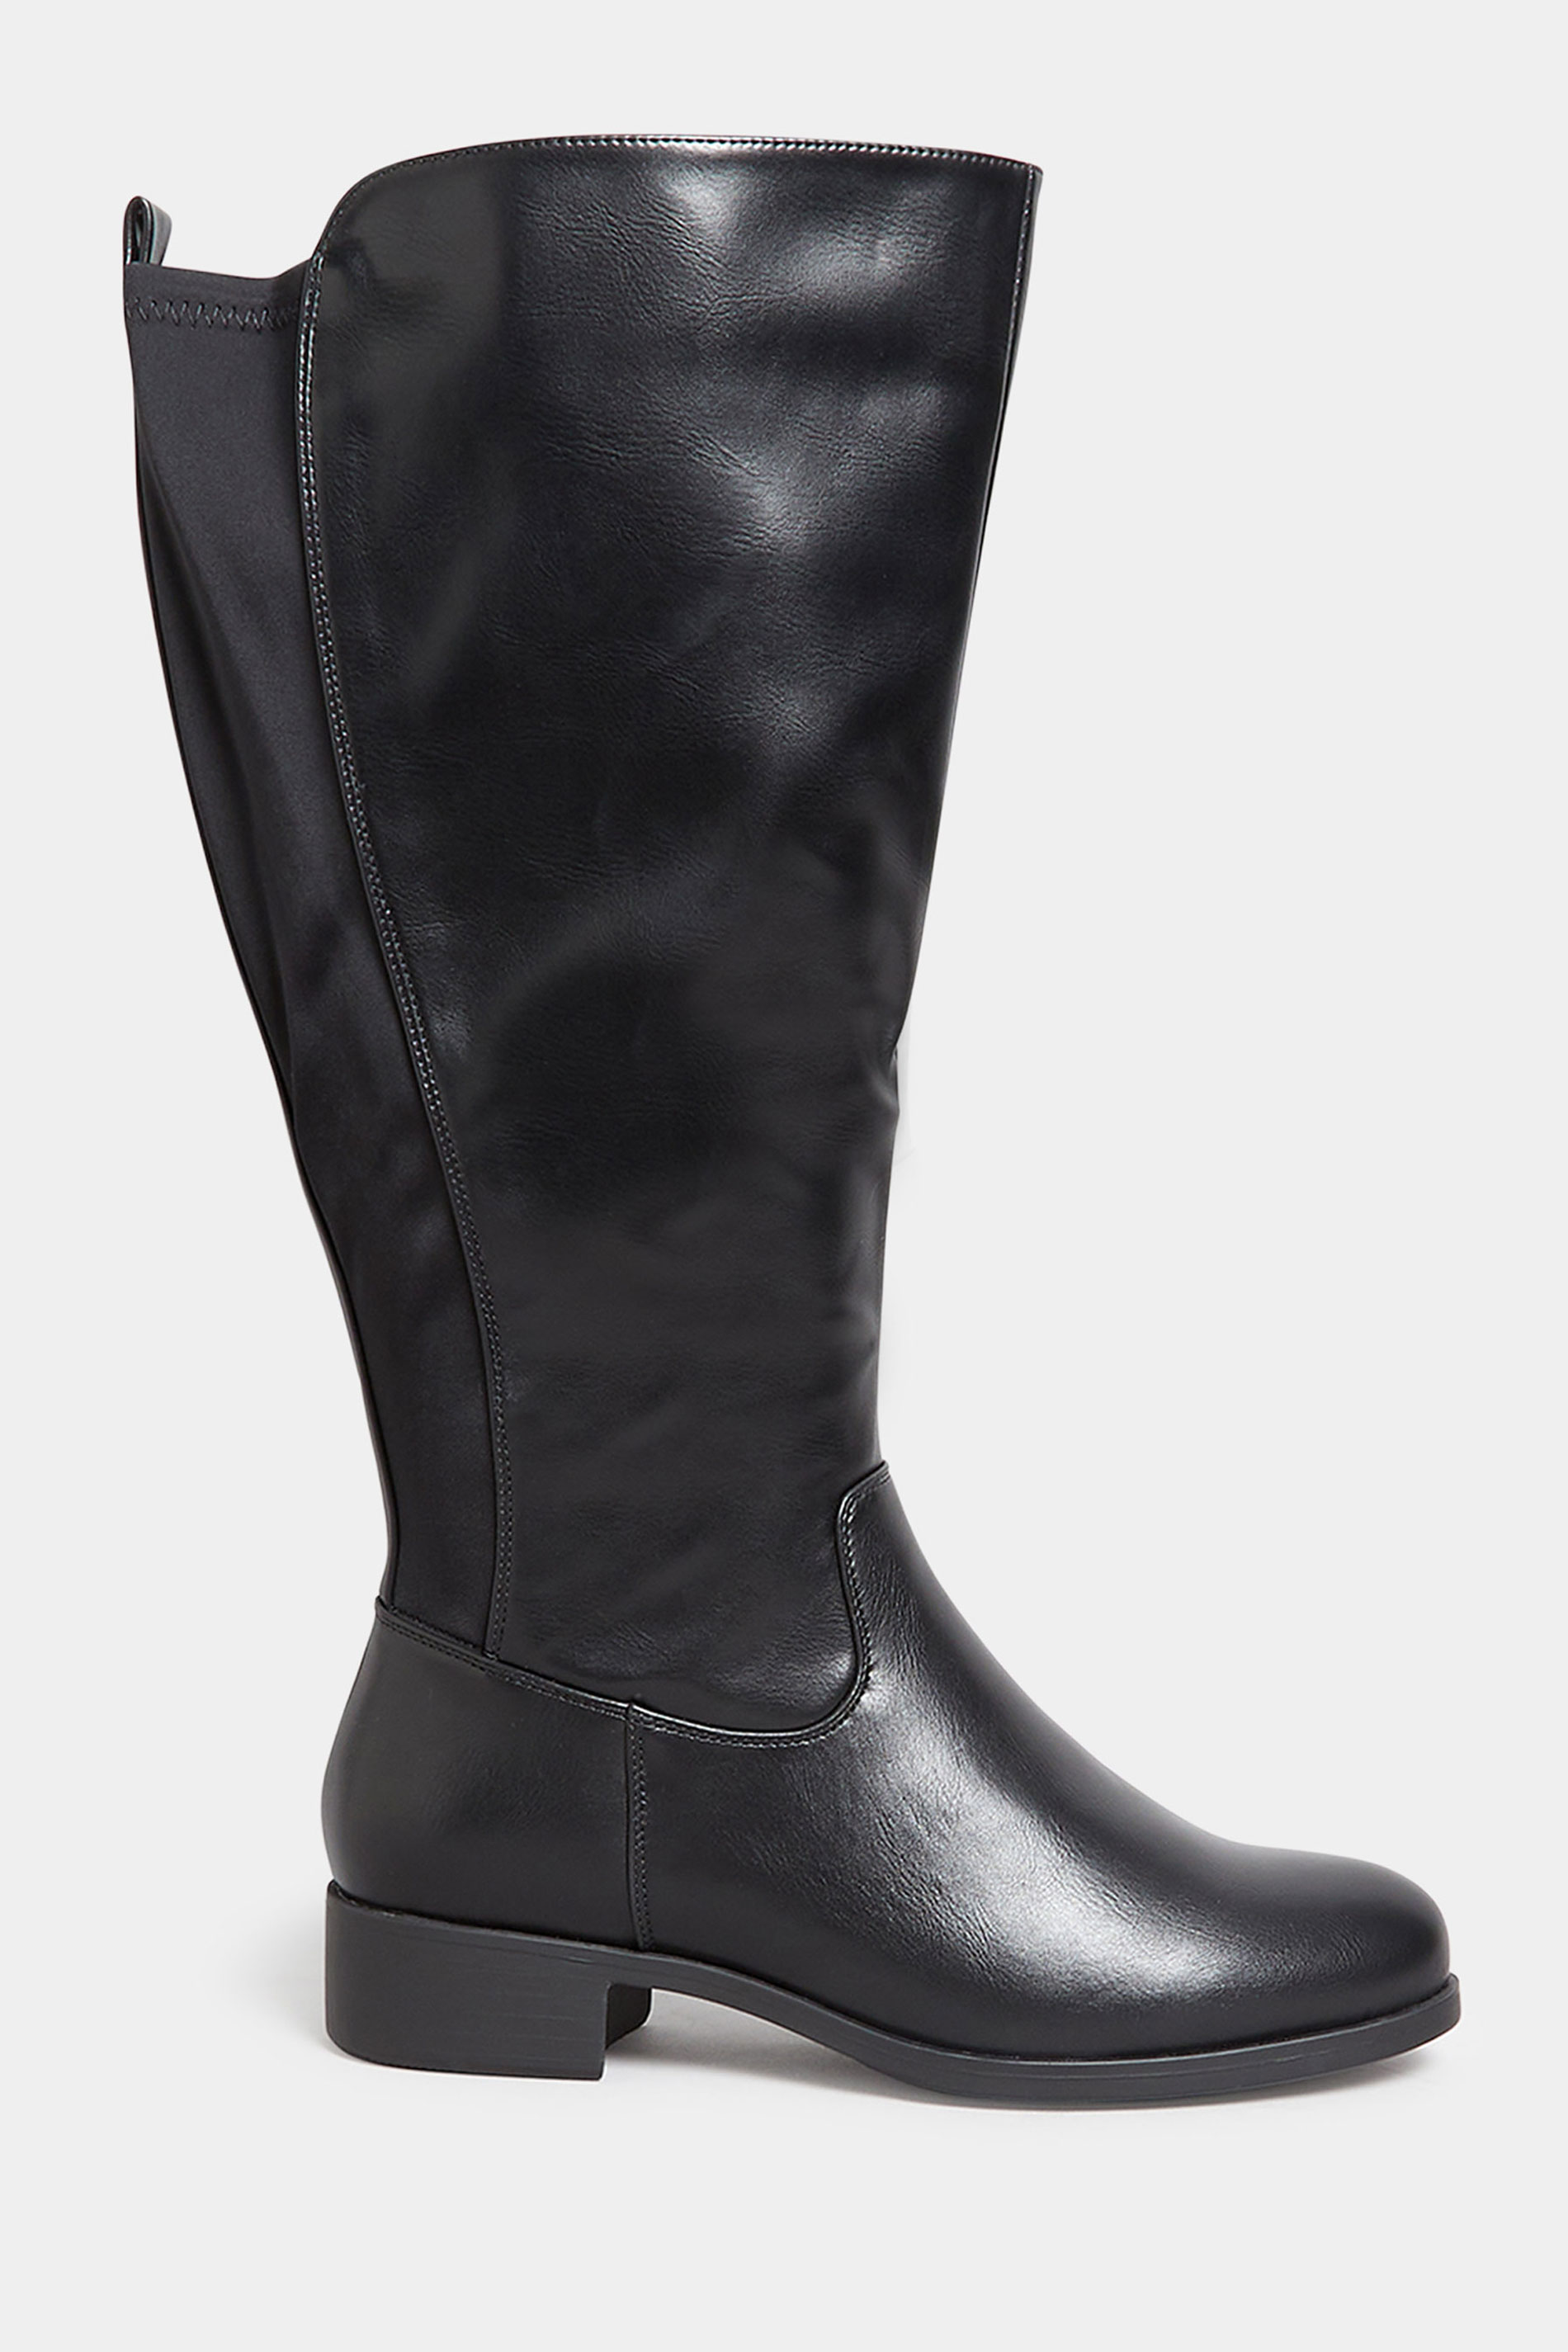 Black Faux Leather Stretch Knee High Boots In Wide E Fit & Extra Wide EEE Fit | Yours Clothing 3